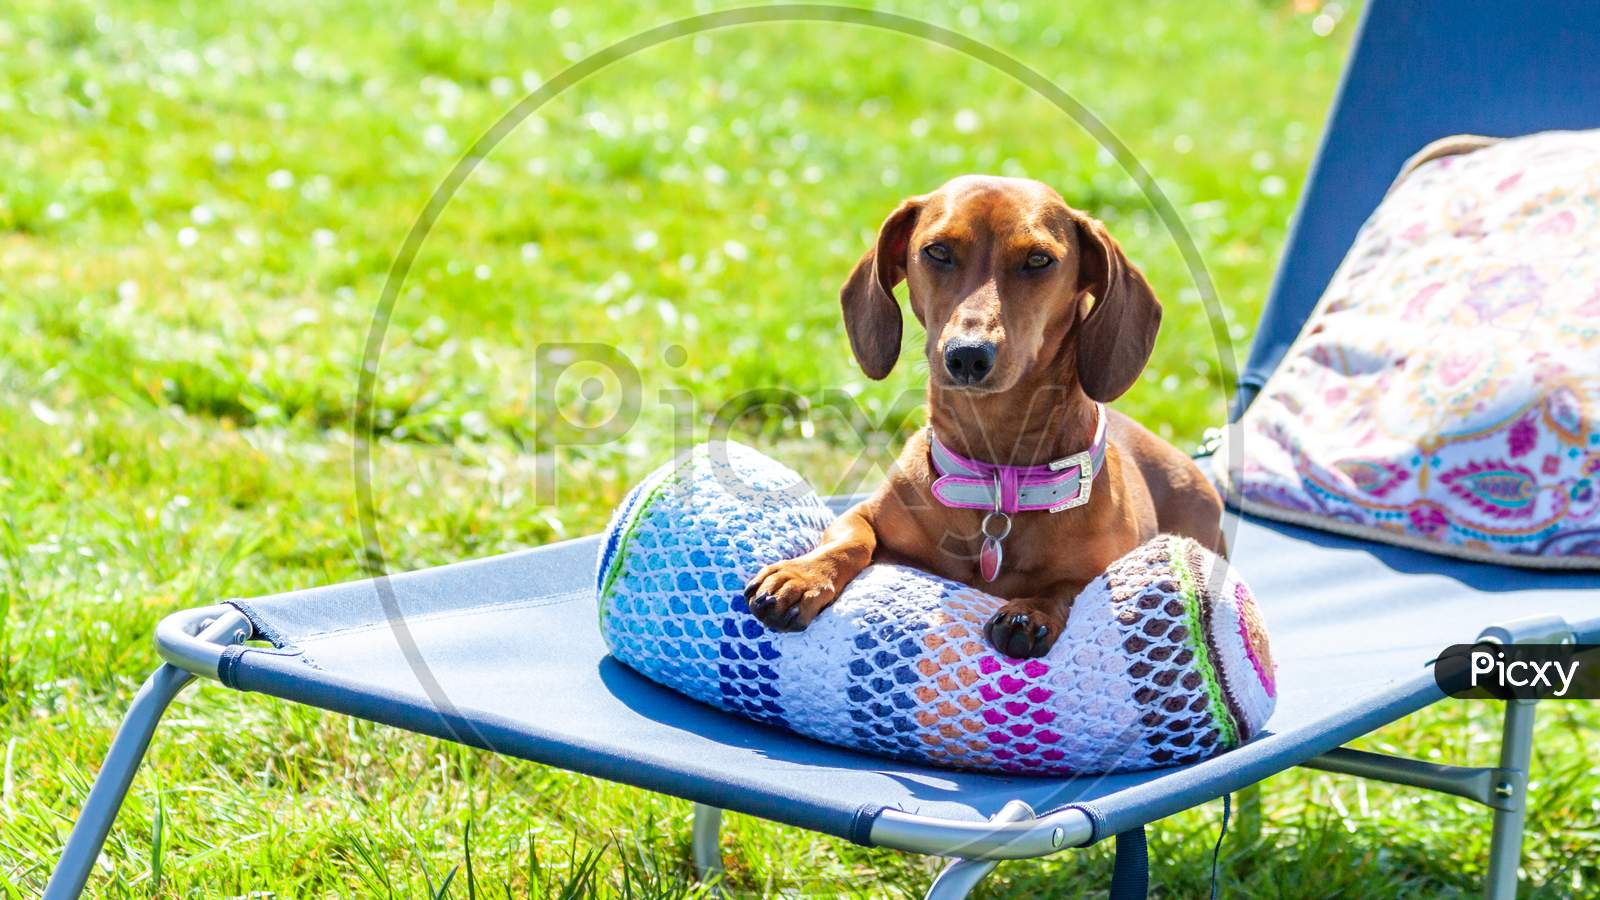 Relaxed Dachshund Sitting Comfortably On A Cushion In A Sunbathing Lounge Chair In A Garden With Green Grass, Wonderful And Relaxed Spring Day In Oensel South Limburg In The Netherlands